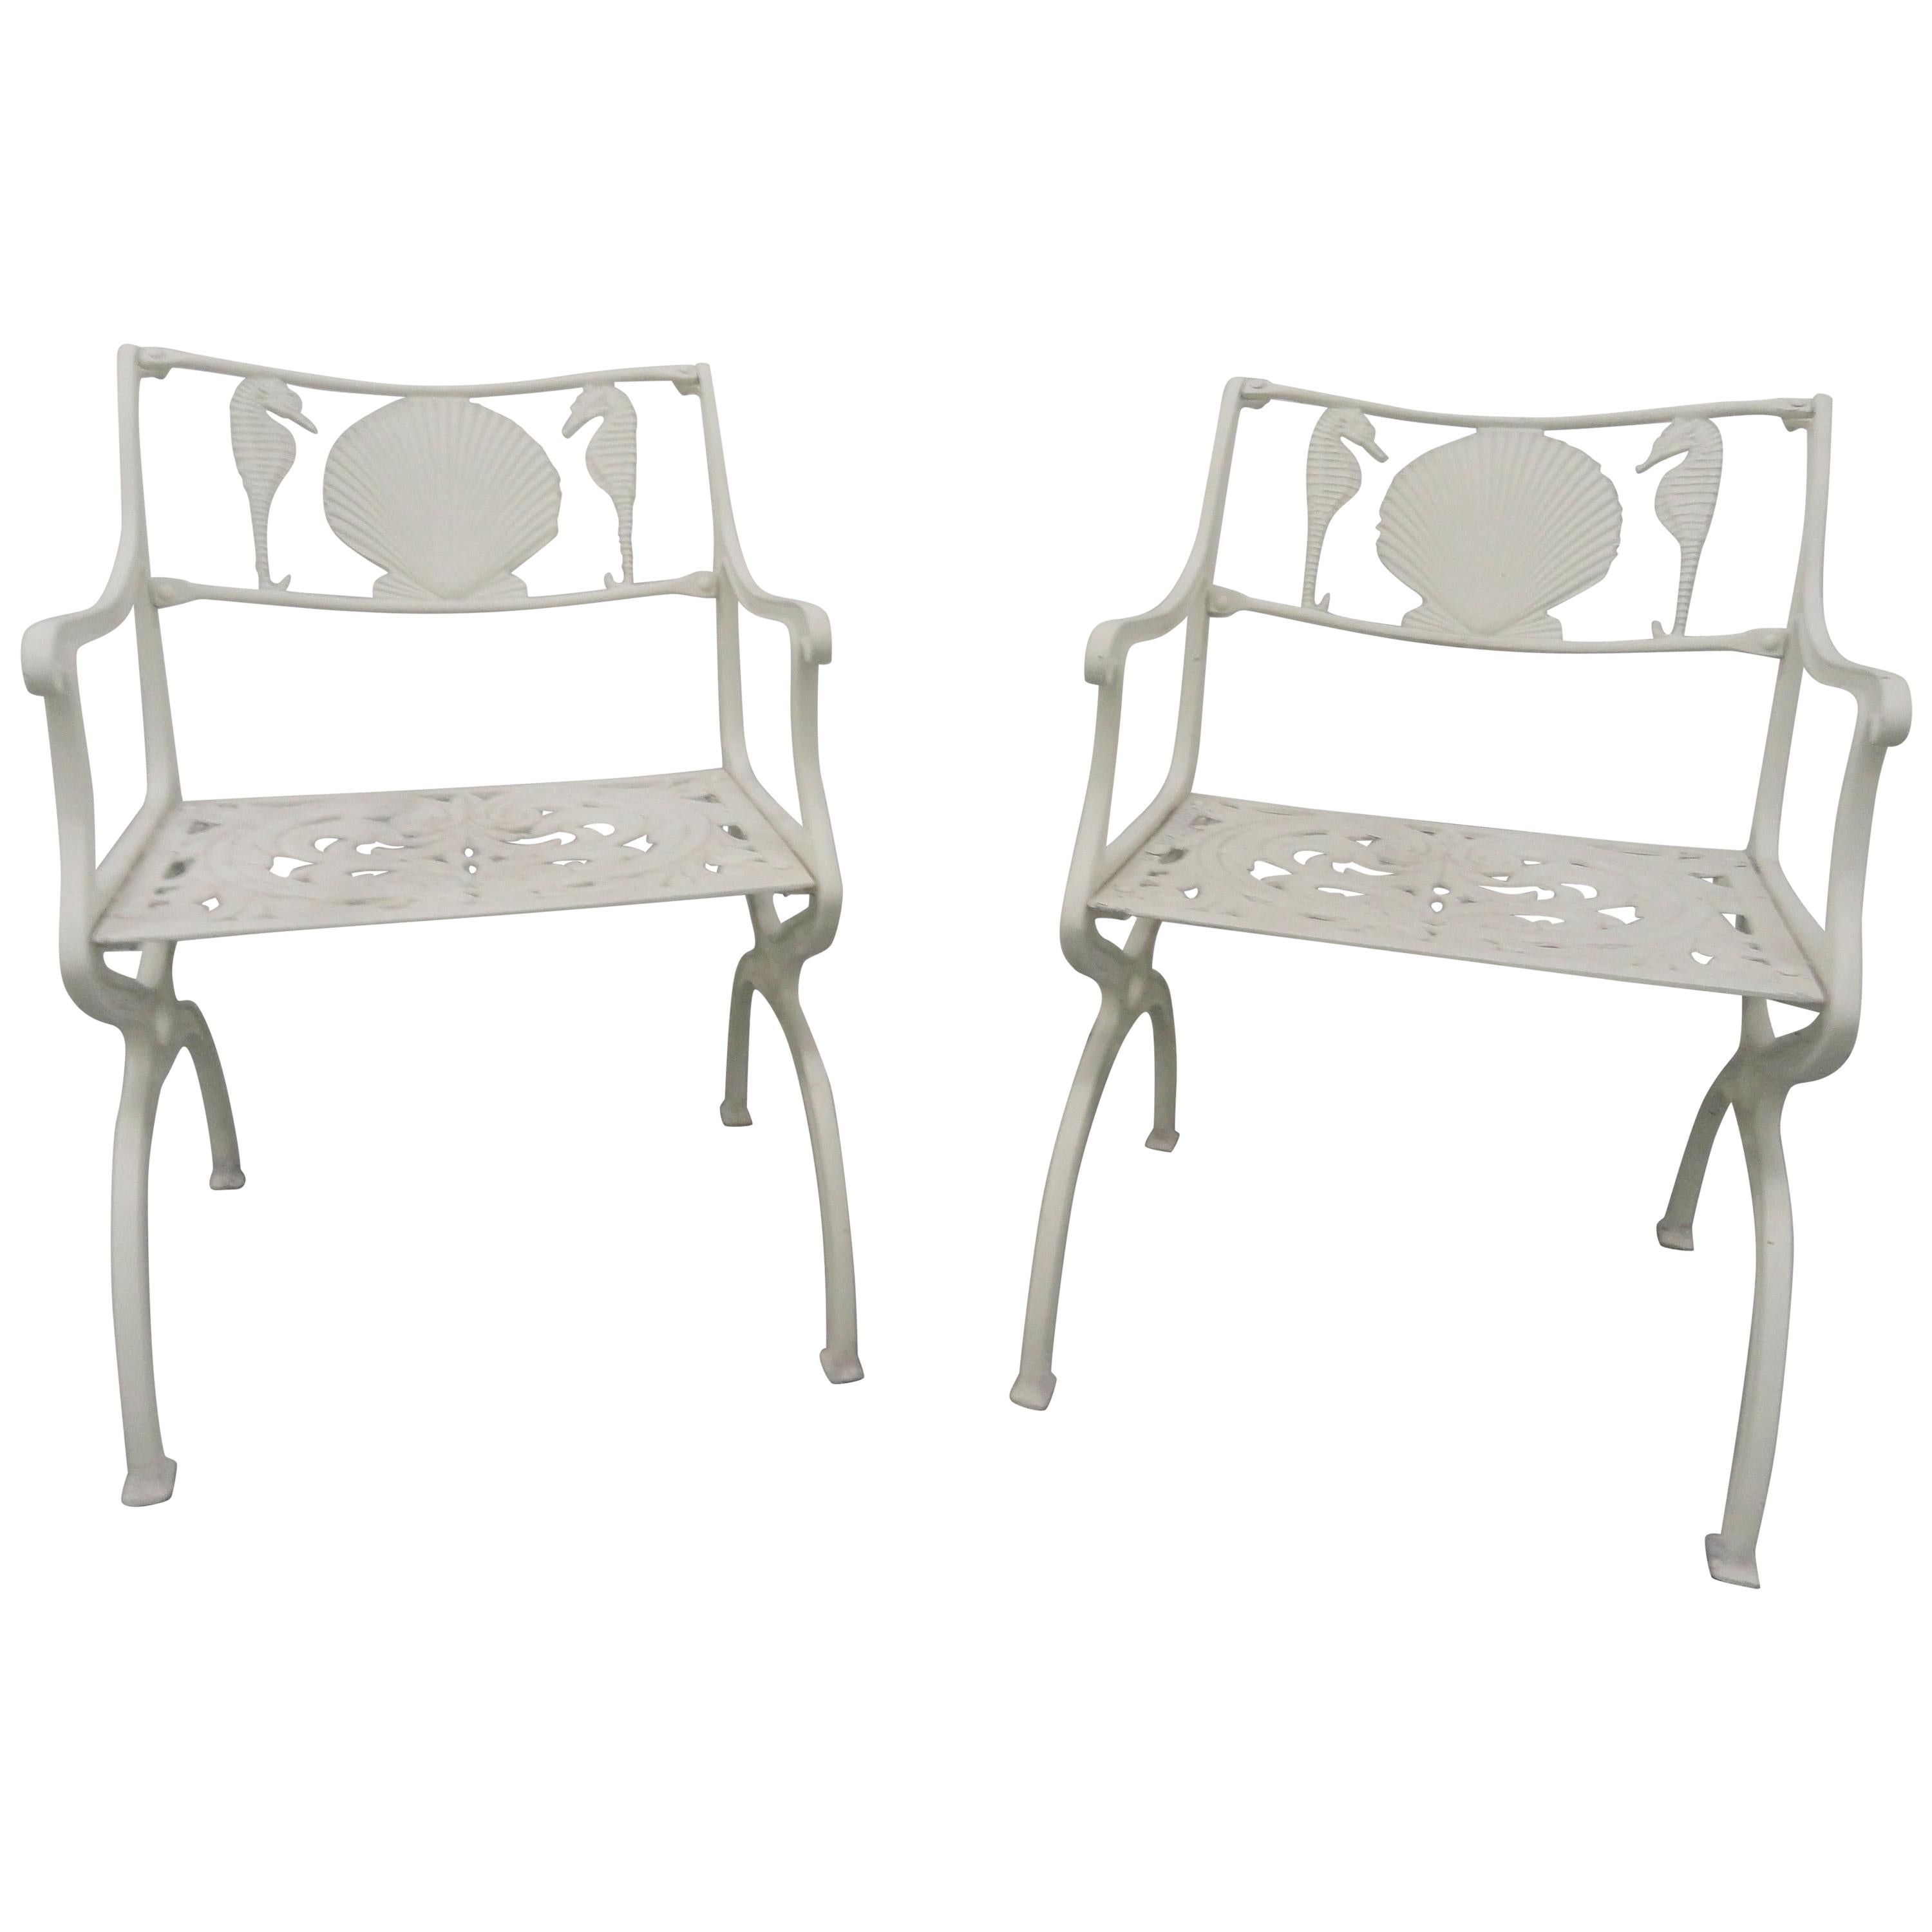 Pair of Cast Aluminum Garden Chairs with Seahorse and Shell Motif, Molla, 1950s For Sale